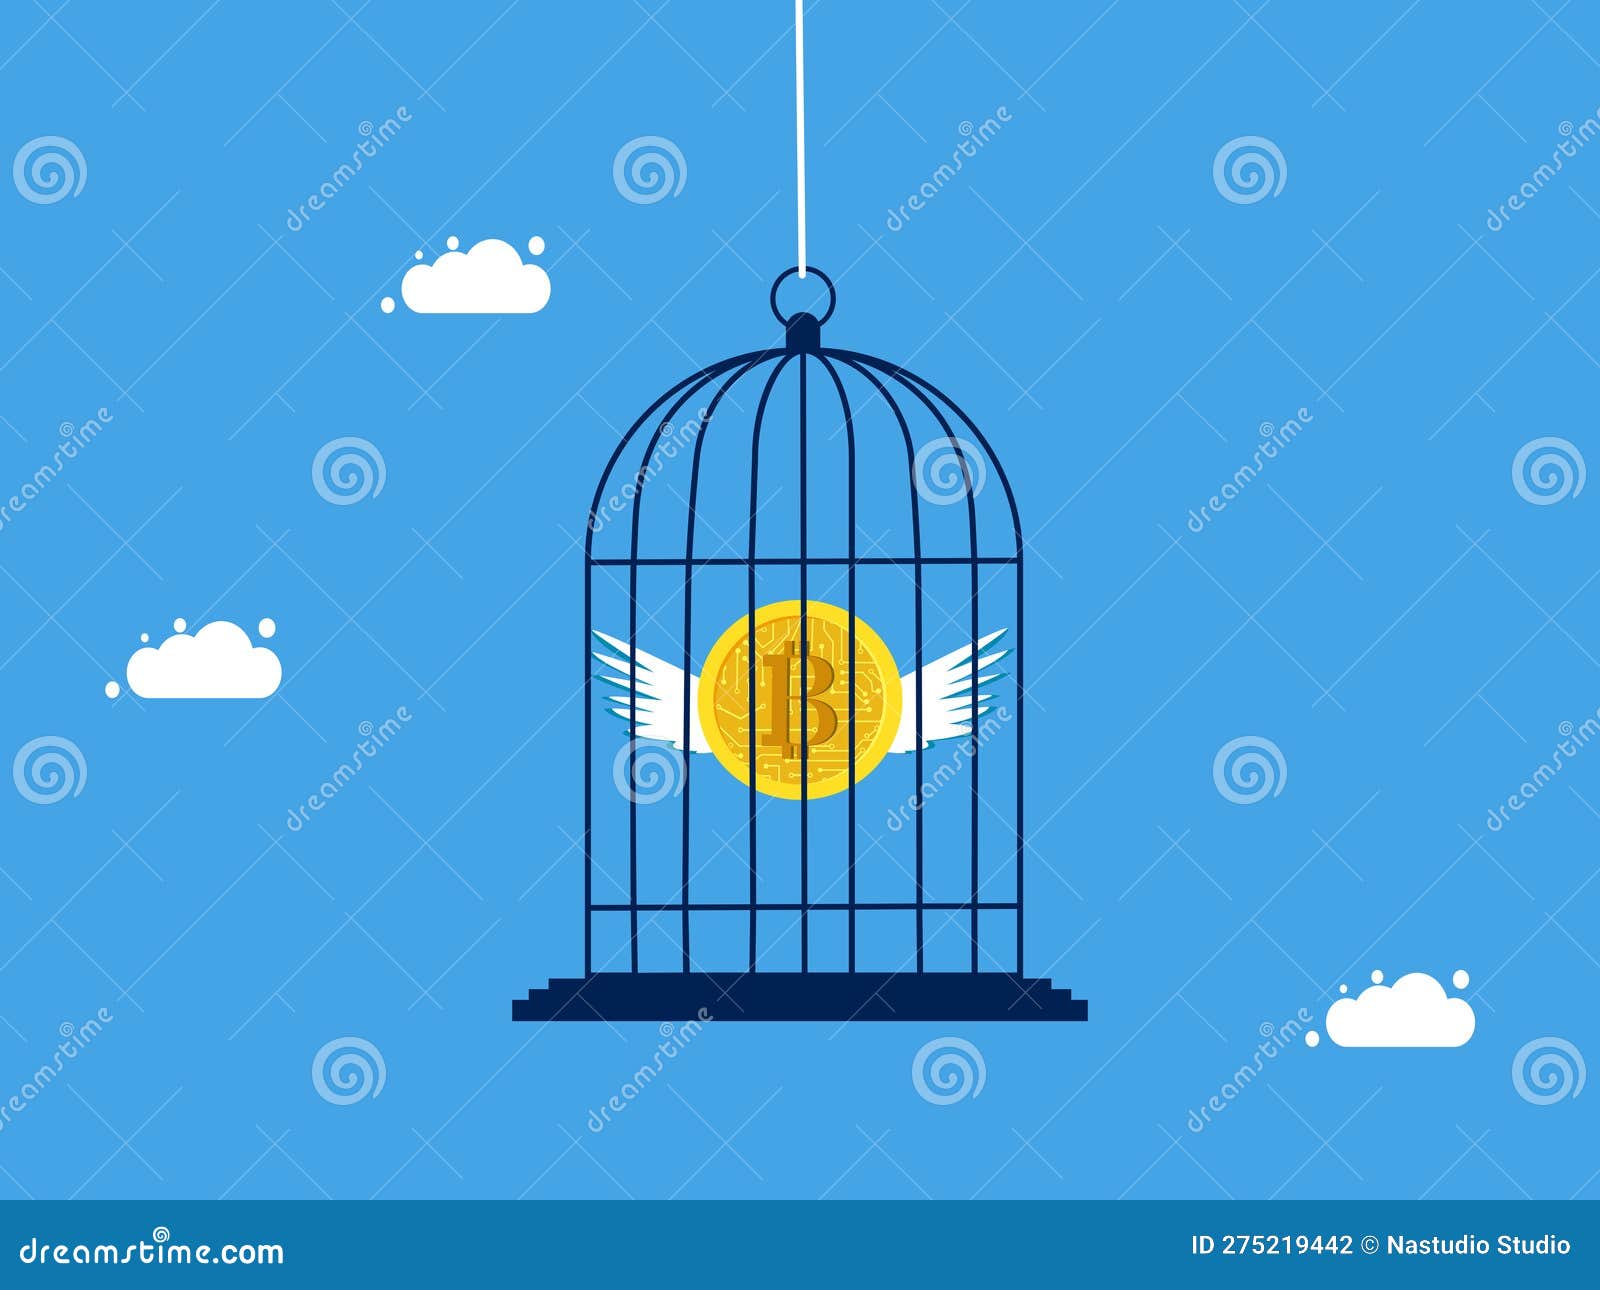 cryptocurrency control. confine or lock digital coins in a birdcage. concept of finance and investment